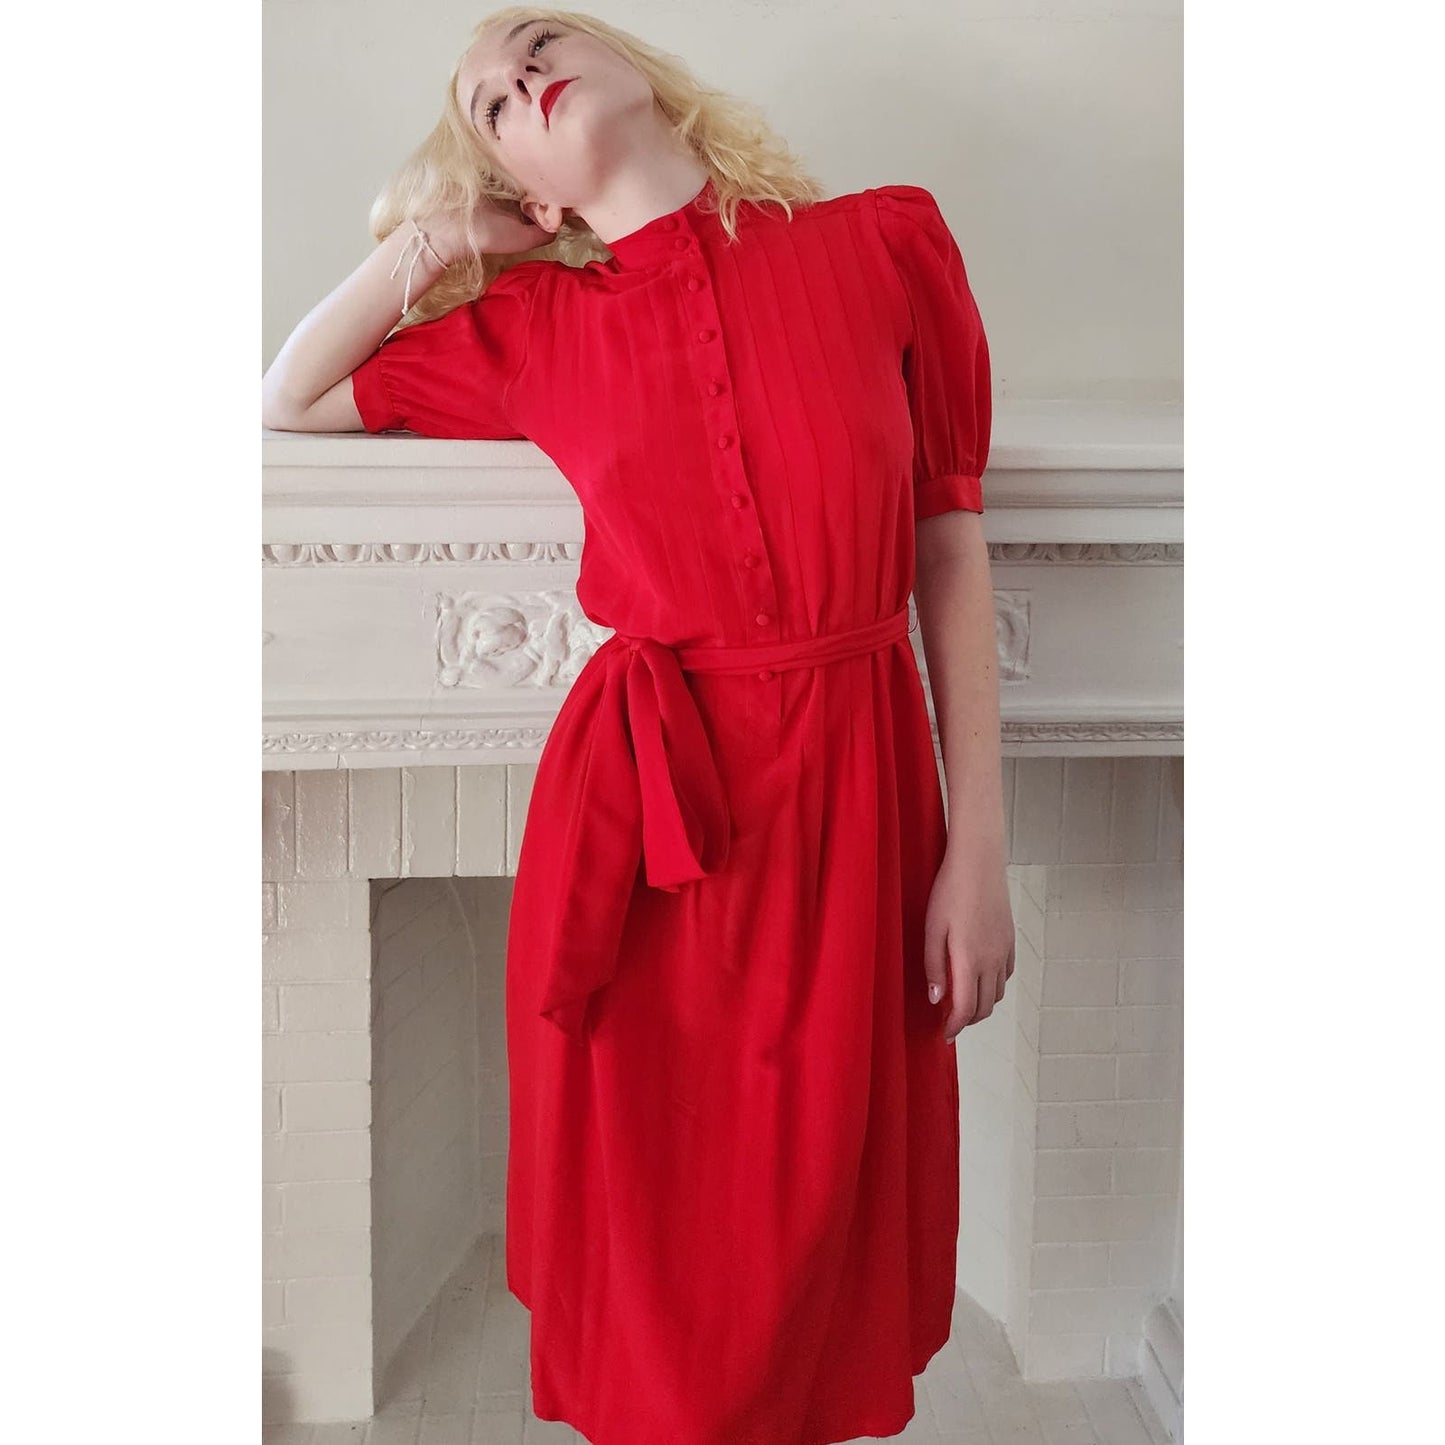 Vintage 80s Red Silk Dress Short Sleeves Pleated Front Lord & Taylor S